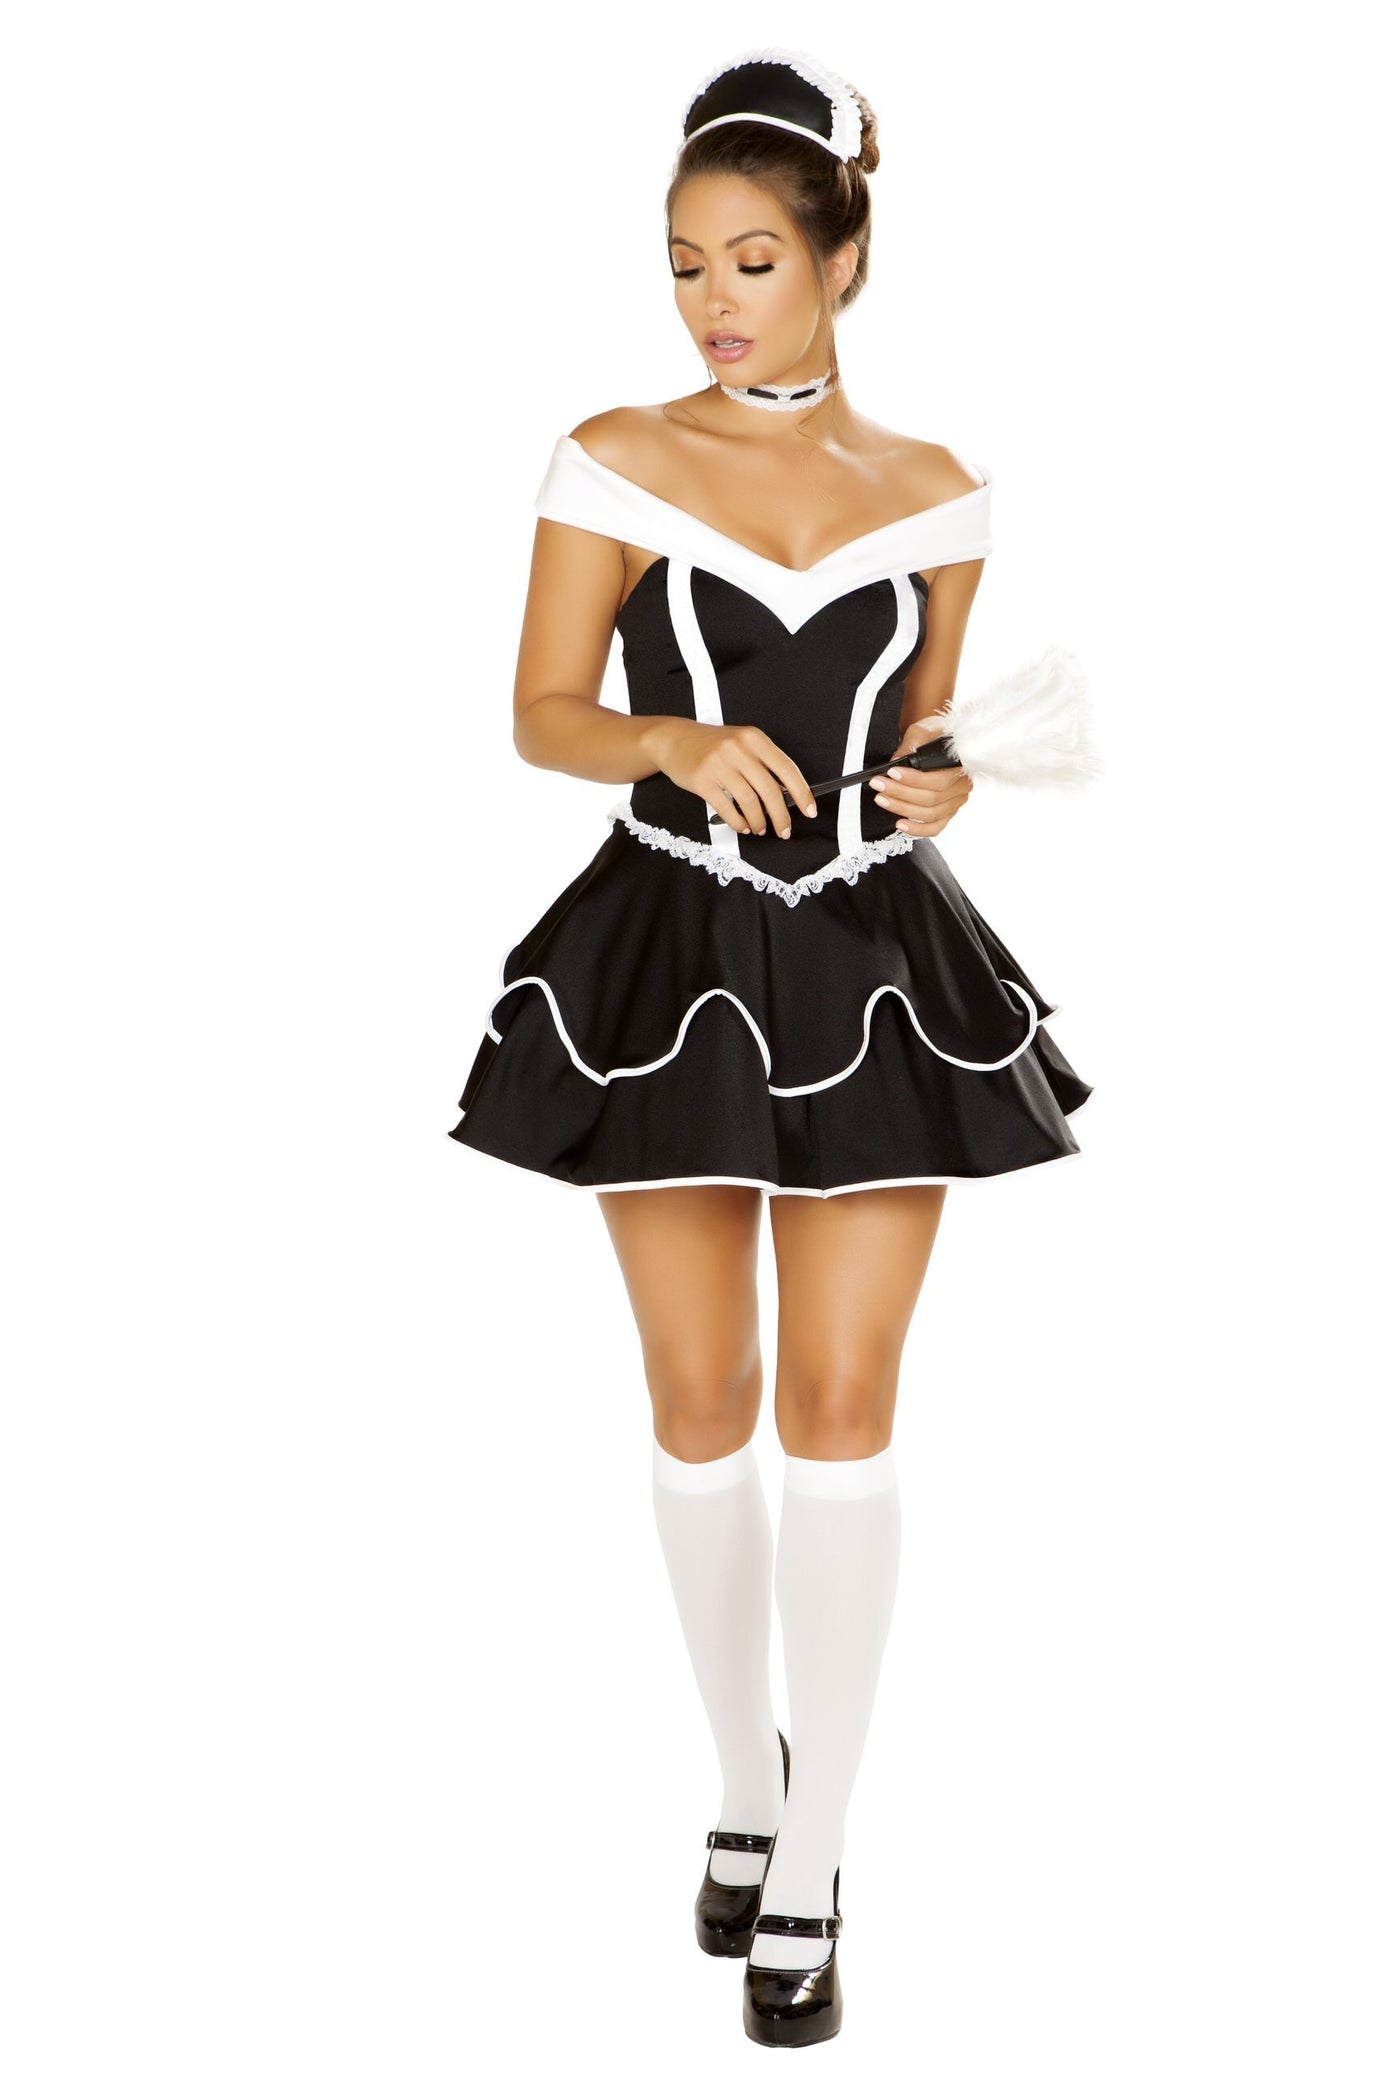 Buy 4pc Sexy Chamber Maid from RomaRetailShop for 69.99 with Same Day Shipping Designed by Roma Costume 4886-AS-S